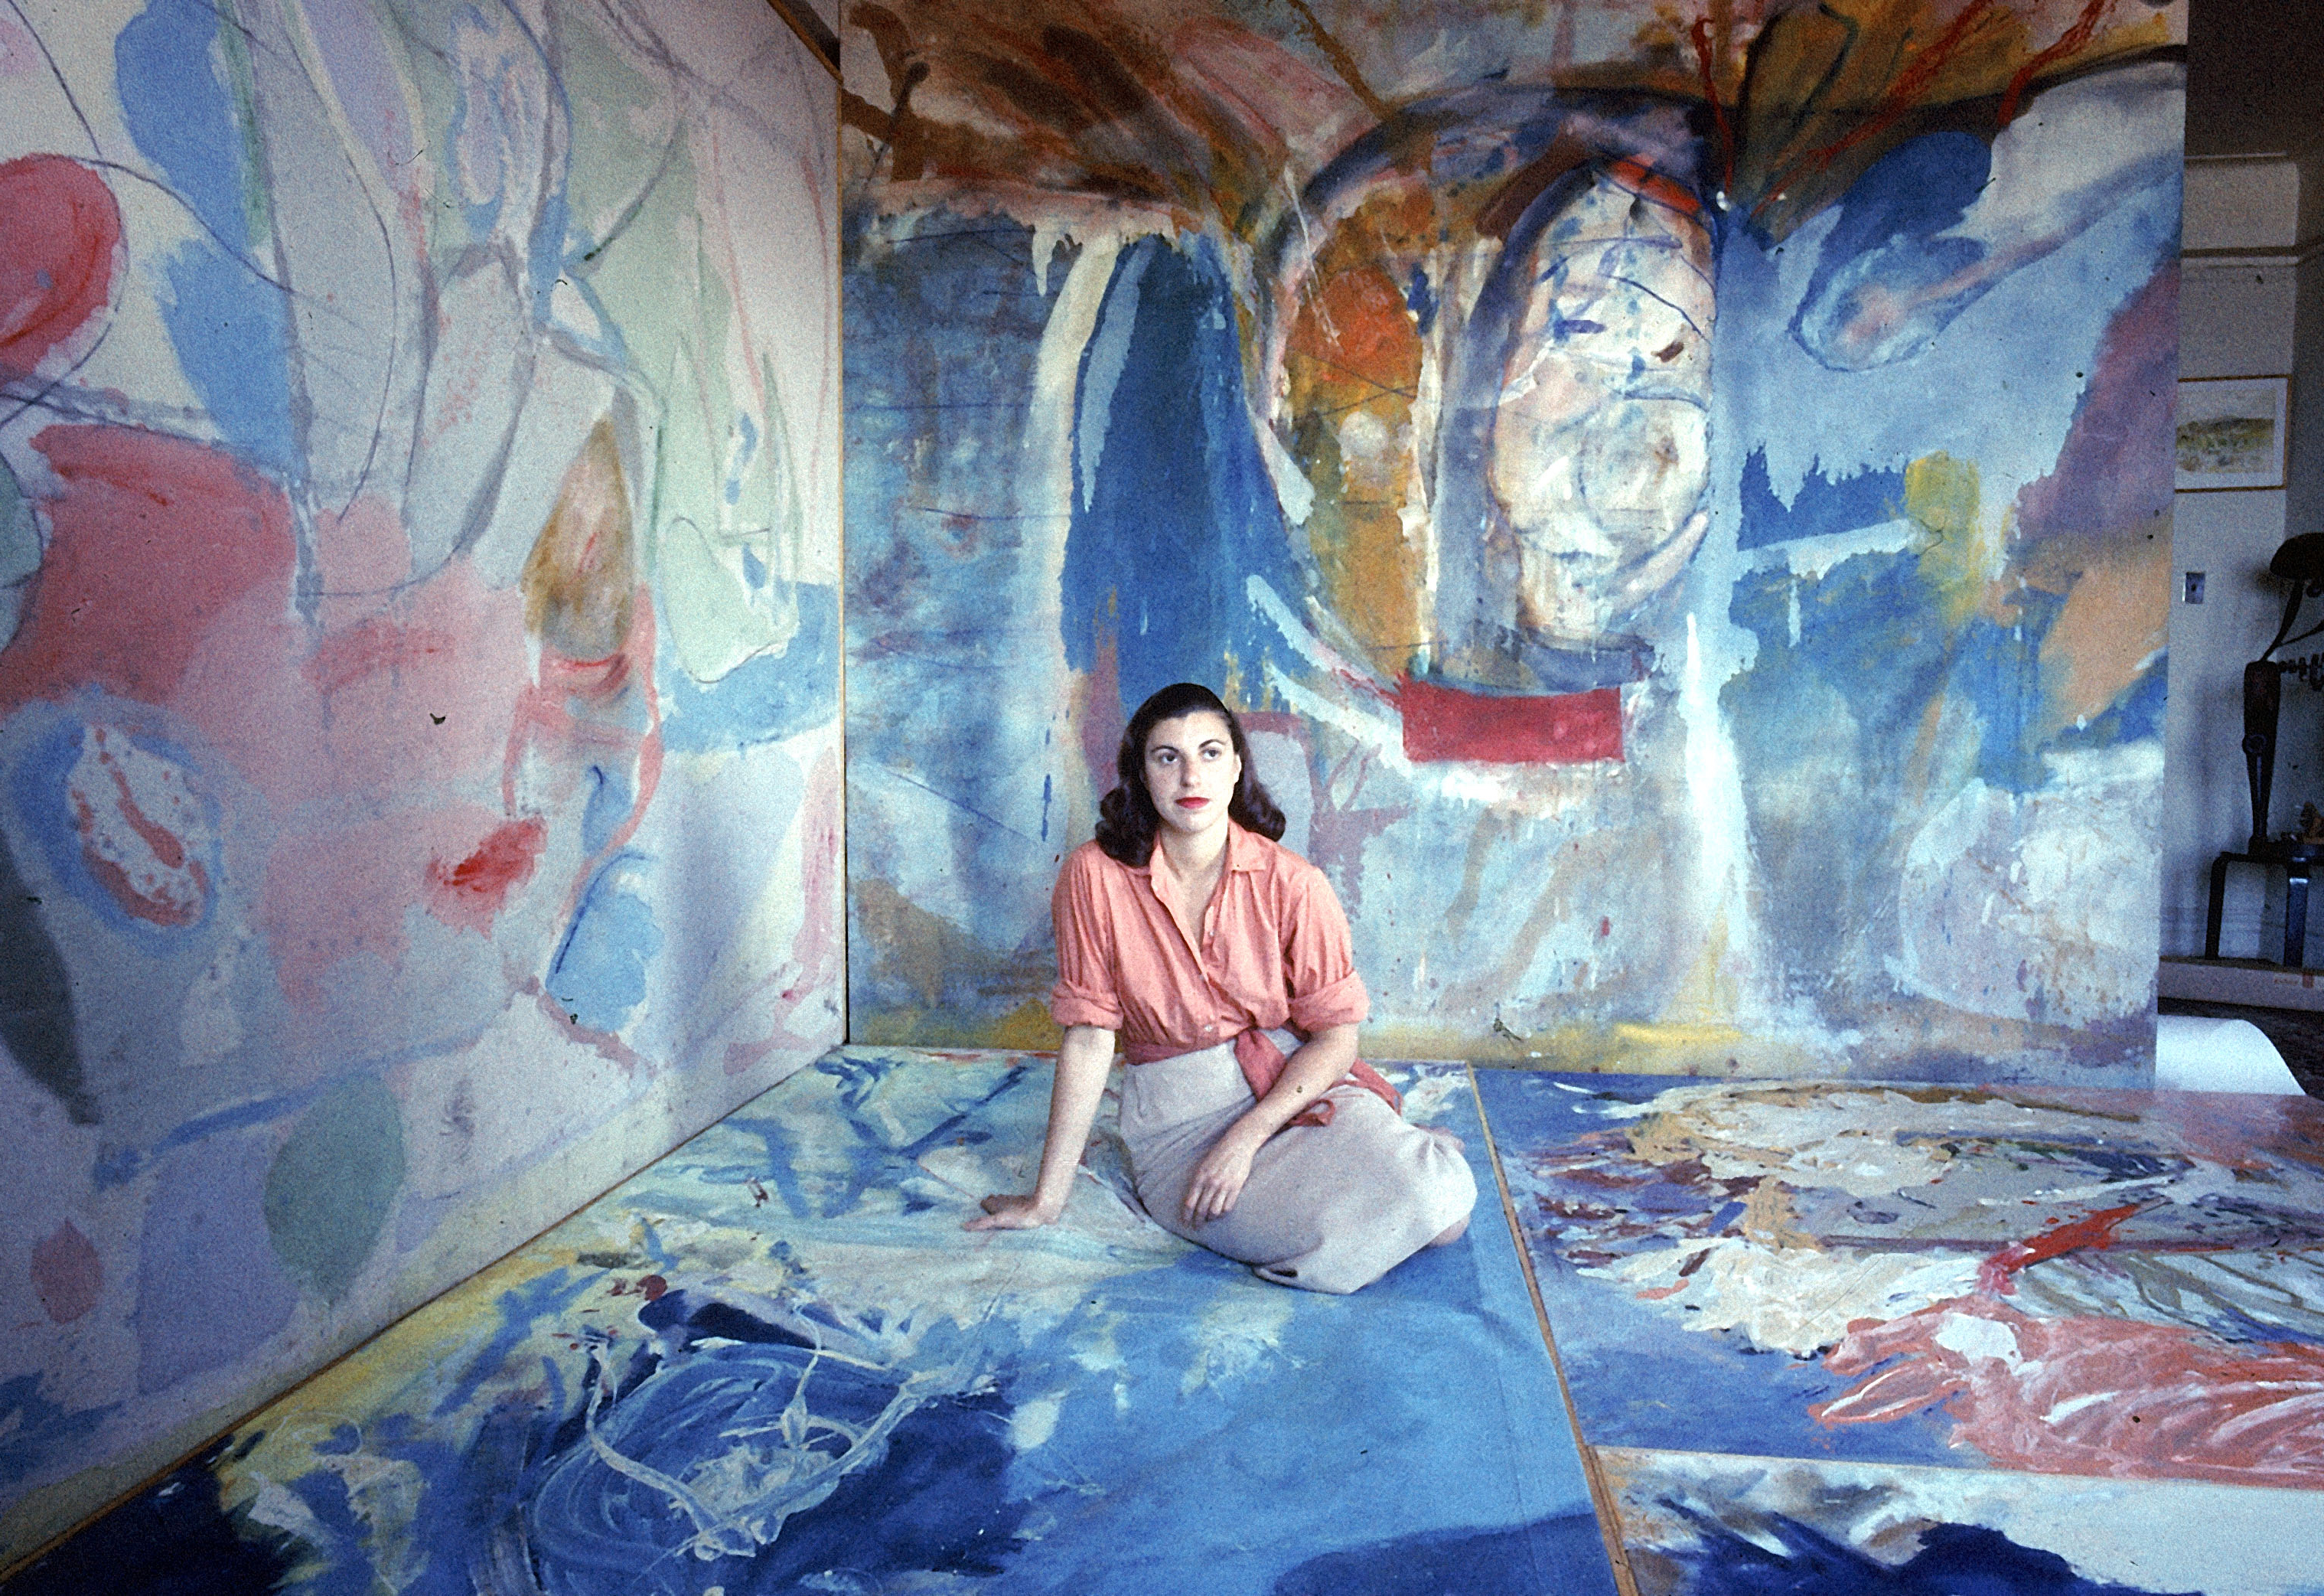 Helen Frankenthaler's Nephew Is Suing the Artist's Foundation for Allegedly ‘Destroying' Her Legacy